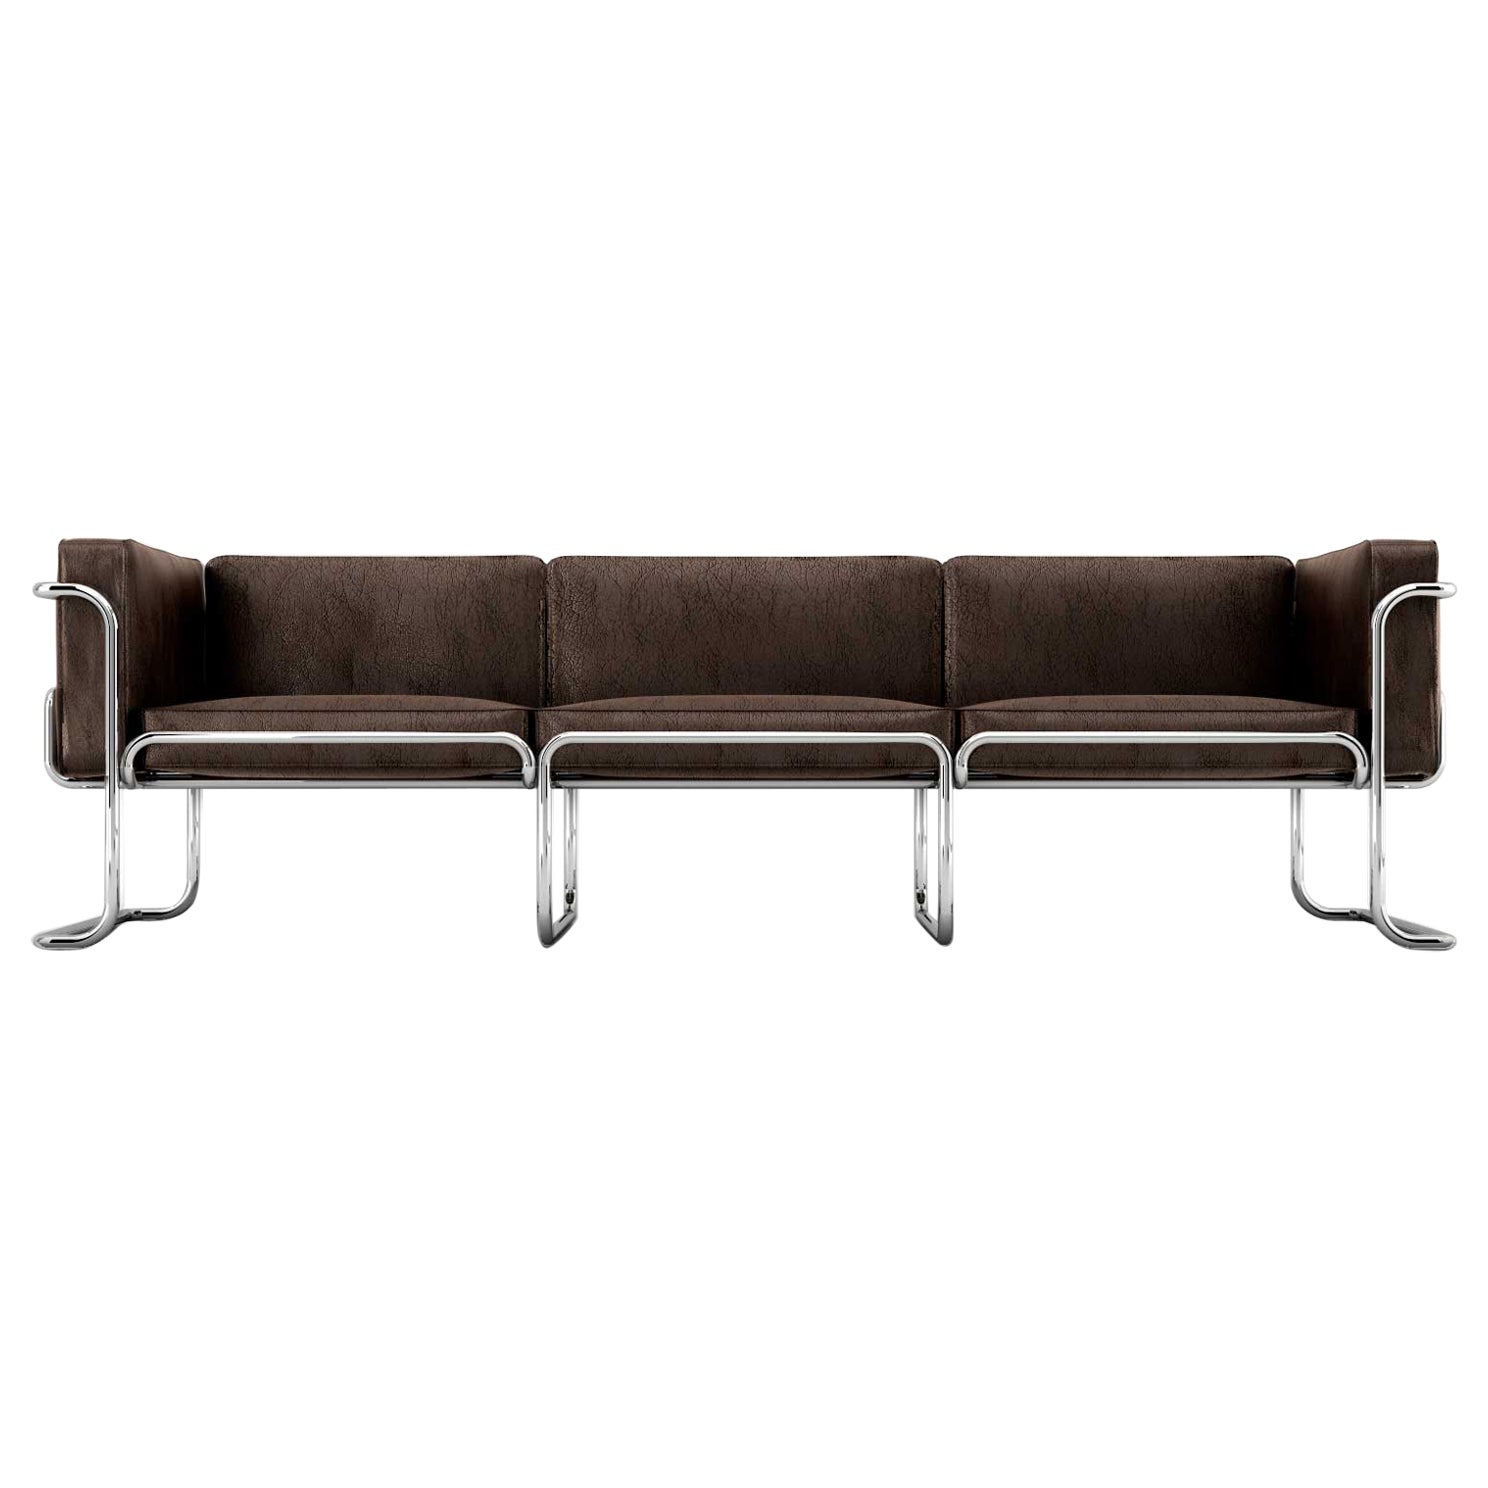 Lotus 3 Seat Sofa - Modern Brown Leather Sofa with Stainless Steel Legs For Sale